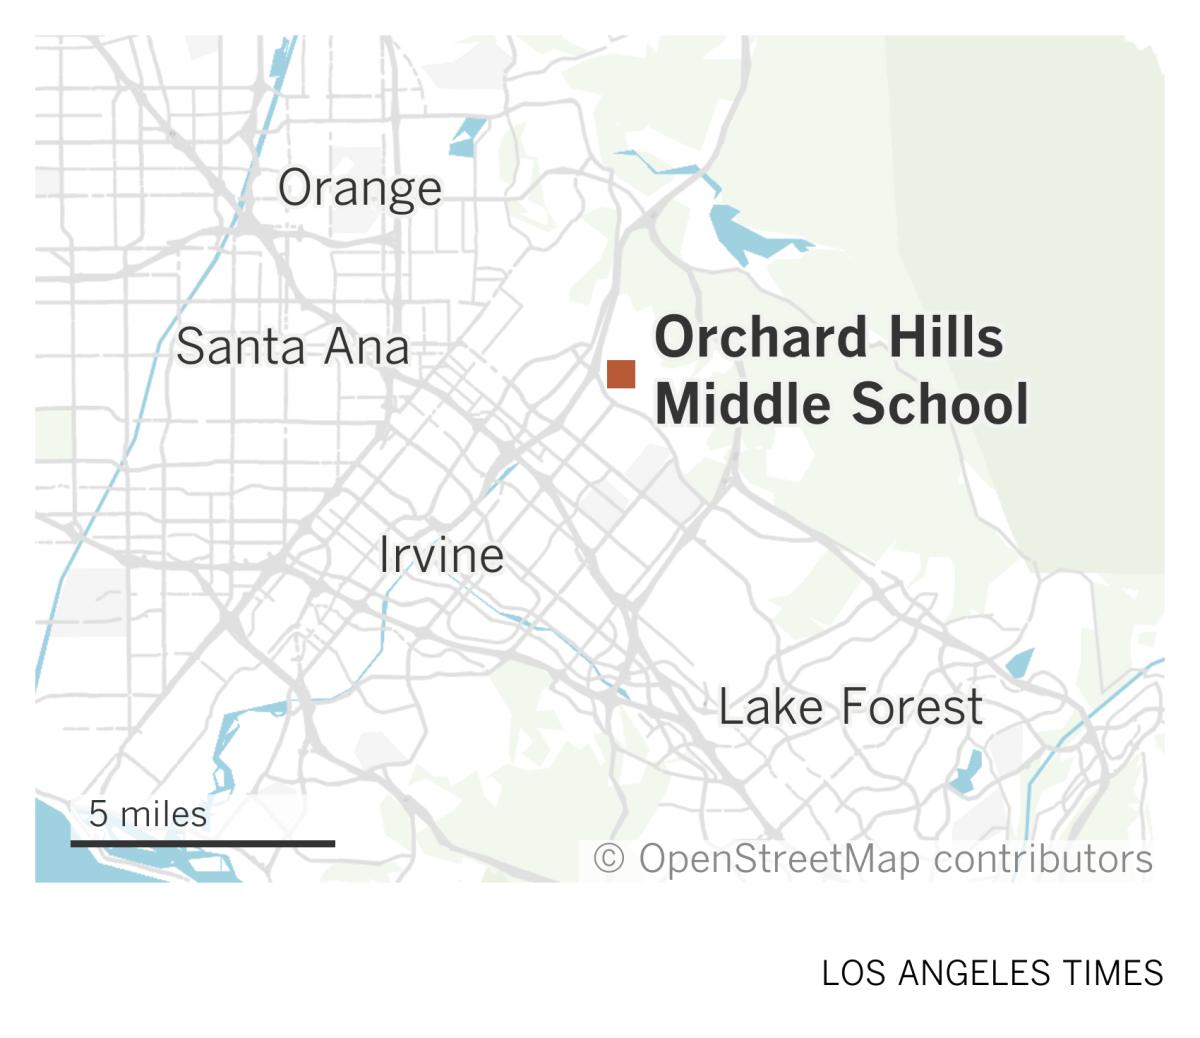 A map of Orange County shows the location of Orchard Hills Middle School in Irvine